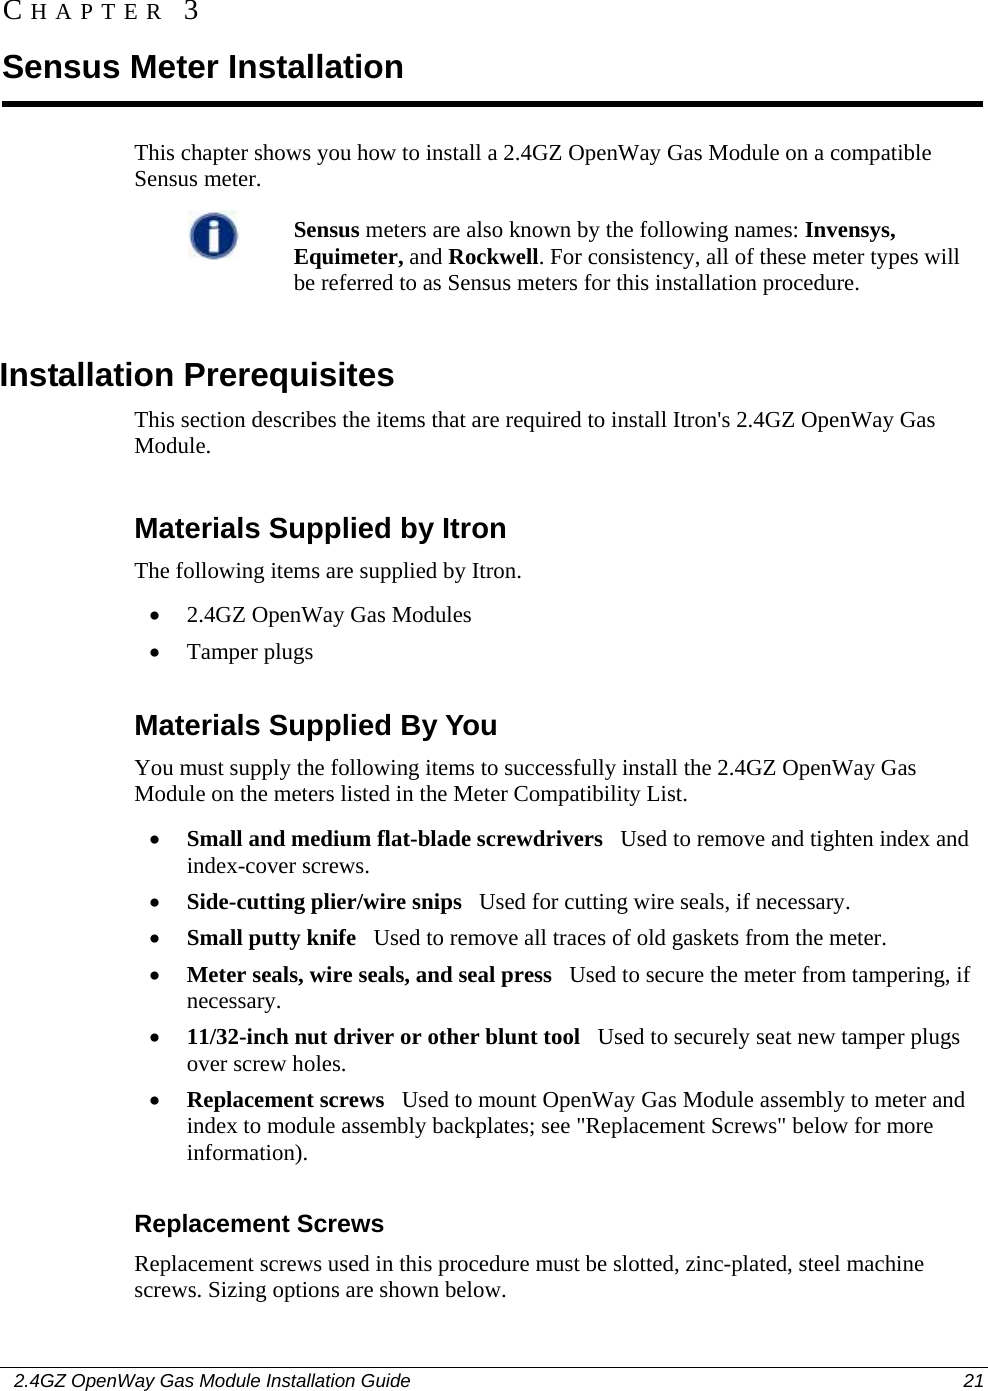    2.4GZ OpenWay Gas Module Installation Guide  21  This chapter shows you how to install a 2.4GZ OpenWay Gas Module on a compatible Sensus meter.   Sensus meters are also known by the following names: Invensys, Equimeter, and Rockwell. For consistency, all of these meter types will be referred to as Sensus meters for this installation procedure.    Installation Prerequisites This section describes the items that are required to install Itron&apos;s 2.4GZ OpenWay Gas Module.  Materials Supplied by Itron The following items are supplied by Itron.  • 2.4GZ OpenWay Gas Modules • Tamper plugs  Materials Supplied By You You must supply the following items to successfully install the 2.4GZ OpenWay Gas Module on the meters listed in the Meter Compatibility List. • Small and medium flat-blade screwdrivers   Used to remove and tighten index and index-cover screws. • Side-cutting plier/wire snips   Used for cutting wire seals, if necessary. • Small putty knife   Used to remove all traces of old gaskets from the meter.  • Meter seals, wire seals, and seal press   Used to secure the meter from tampering, if necessary. • 11/32-inch nut driver or other blunt tool   Used to securely seat new tamper plugs over screw holes.  • Replacement screws   Used to mount OpenWay Gas Module assembly to meter and index to module assembly backplates; see &quot;Replacement Screws&quot; below for more information).  Replacement Screws Replacement screws used in this procedure must be slotted, zinc-plated, steel machine screws. Sizing options are shown below.  CHAPTER 3 Sensus Meter Installation 